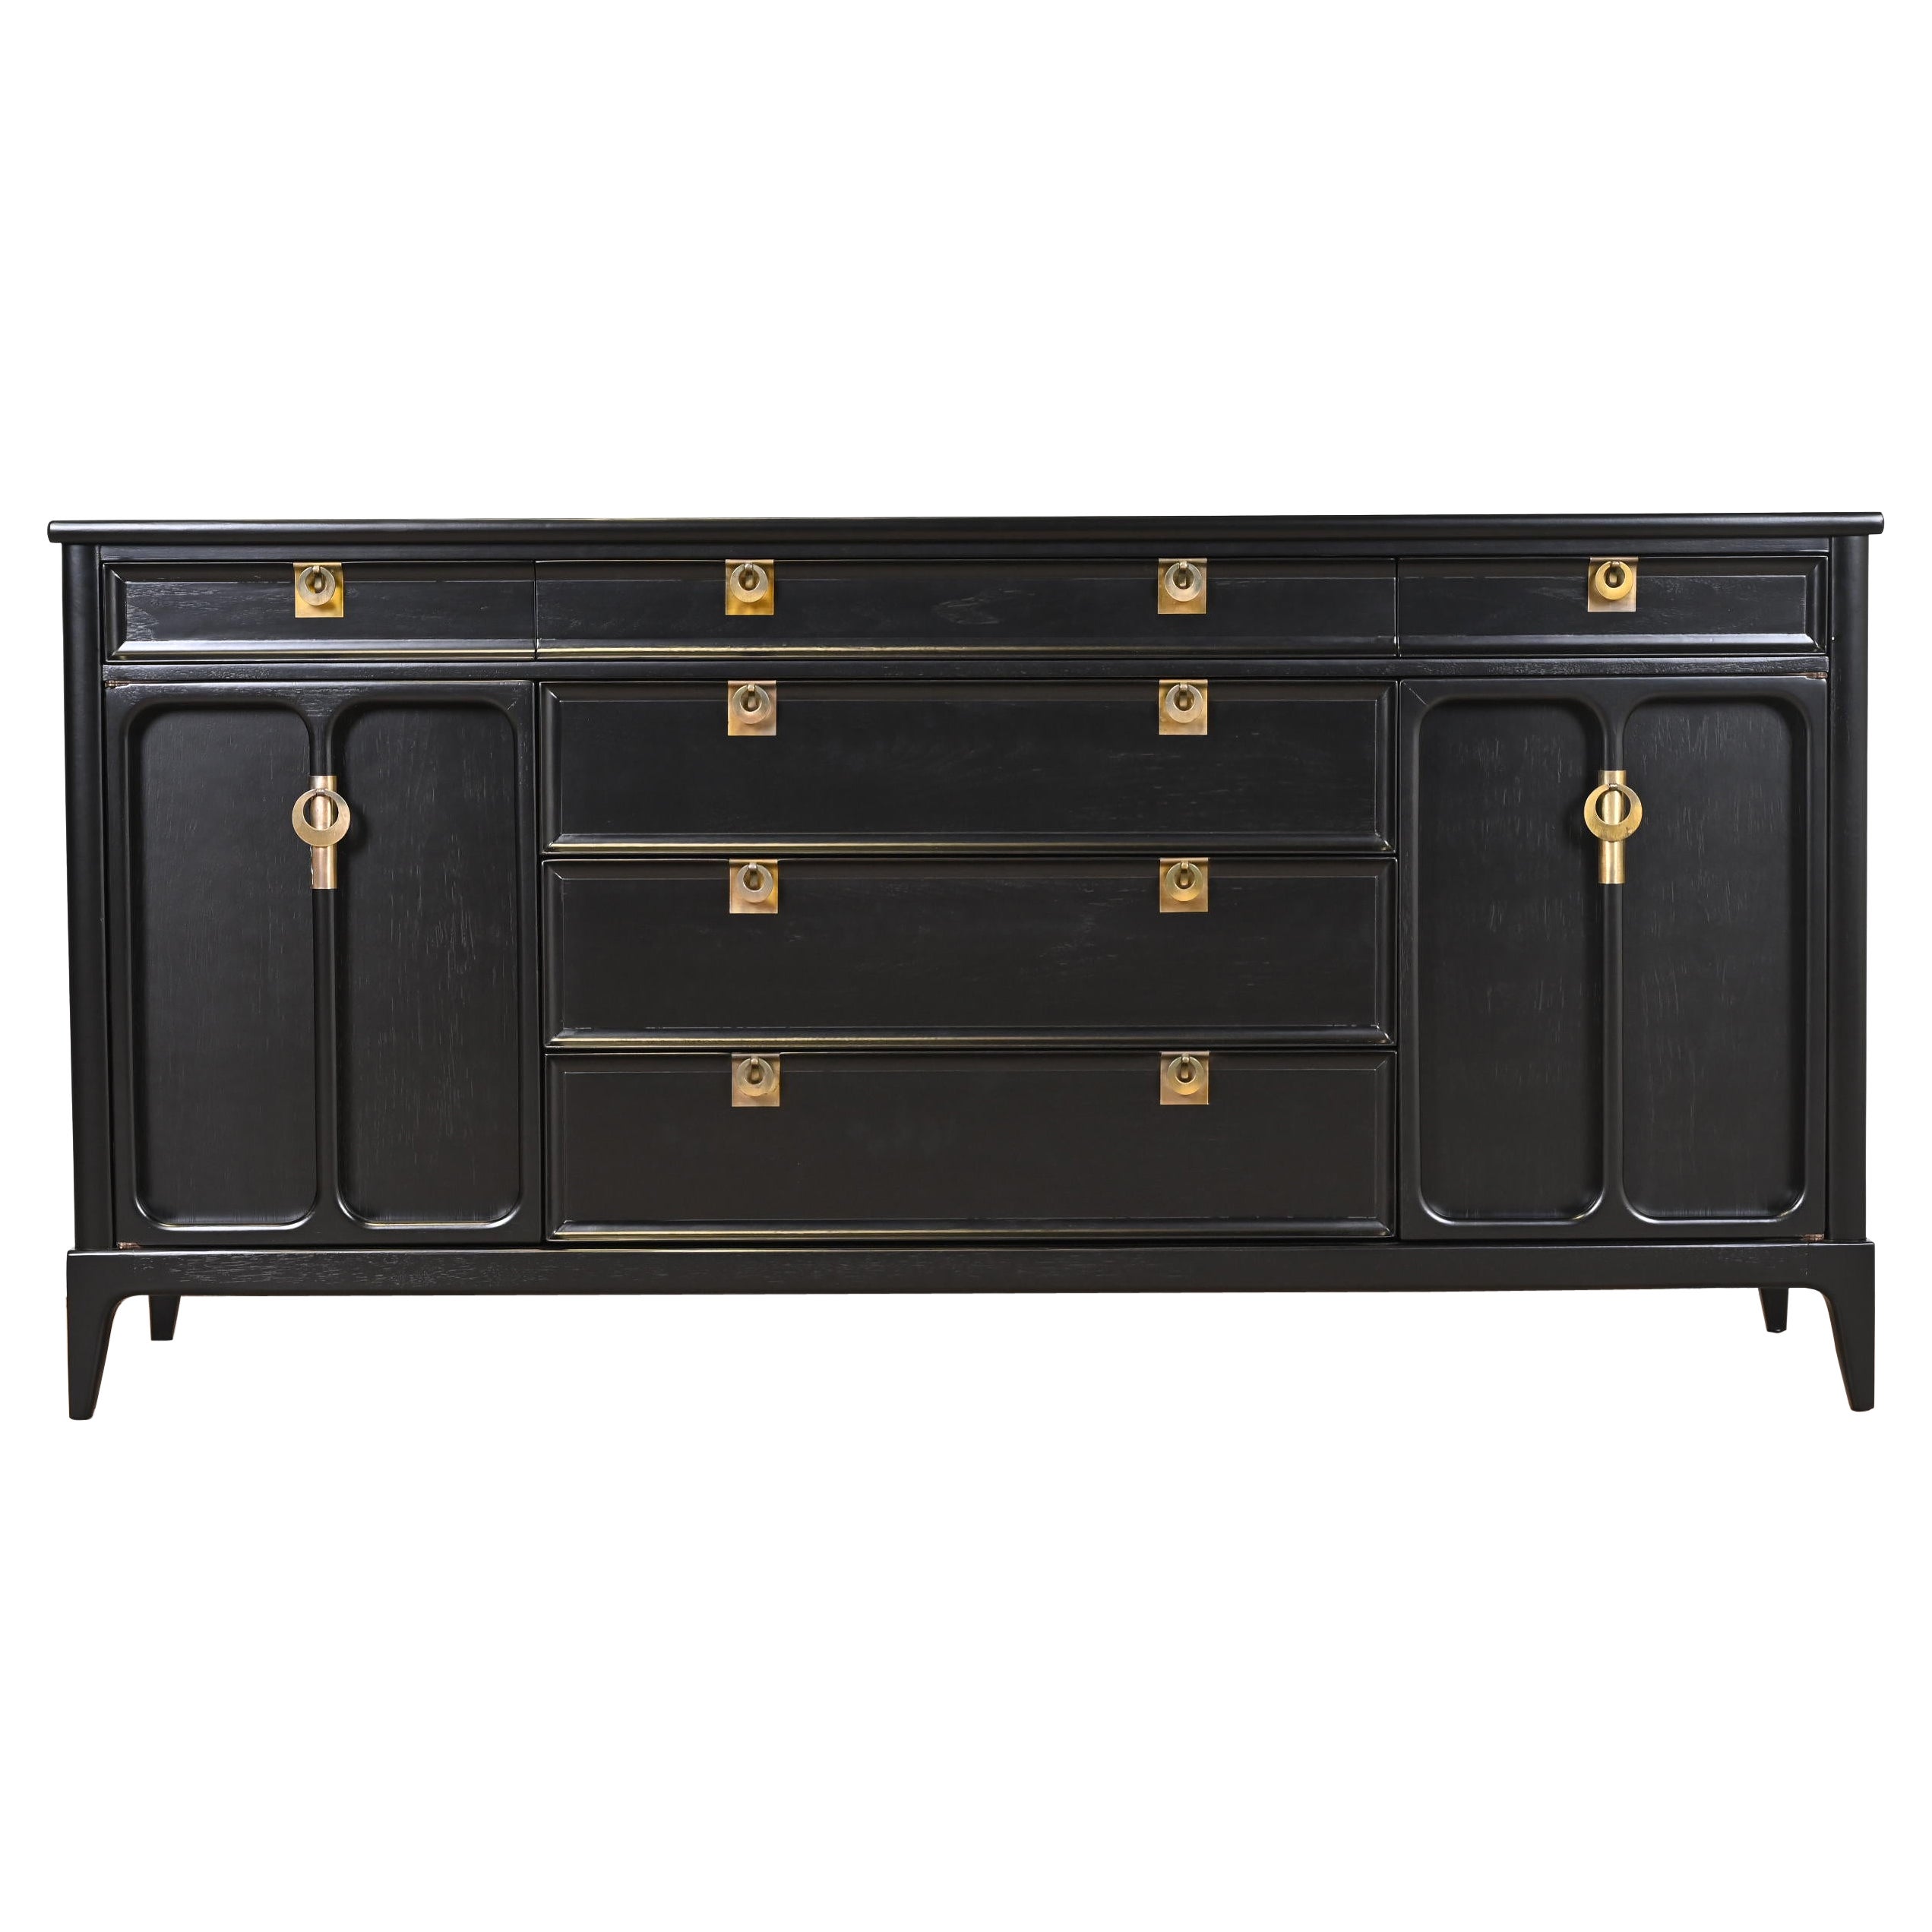 Mid-Century Modern Black Lacquered Sideboard by White Furniture, Refinished